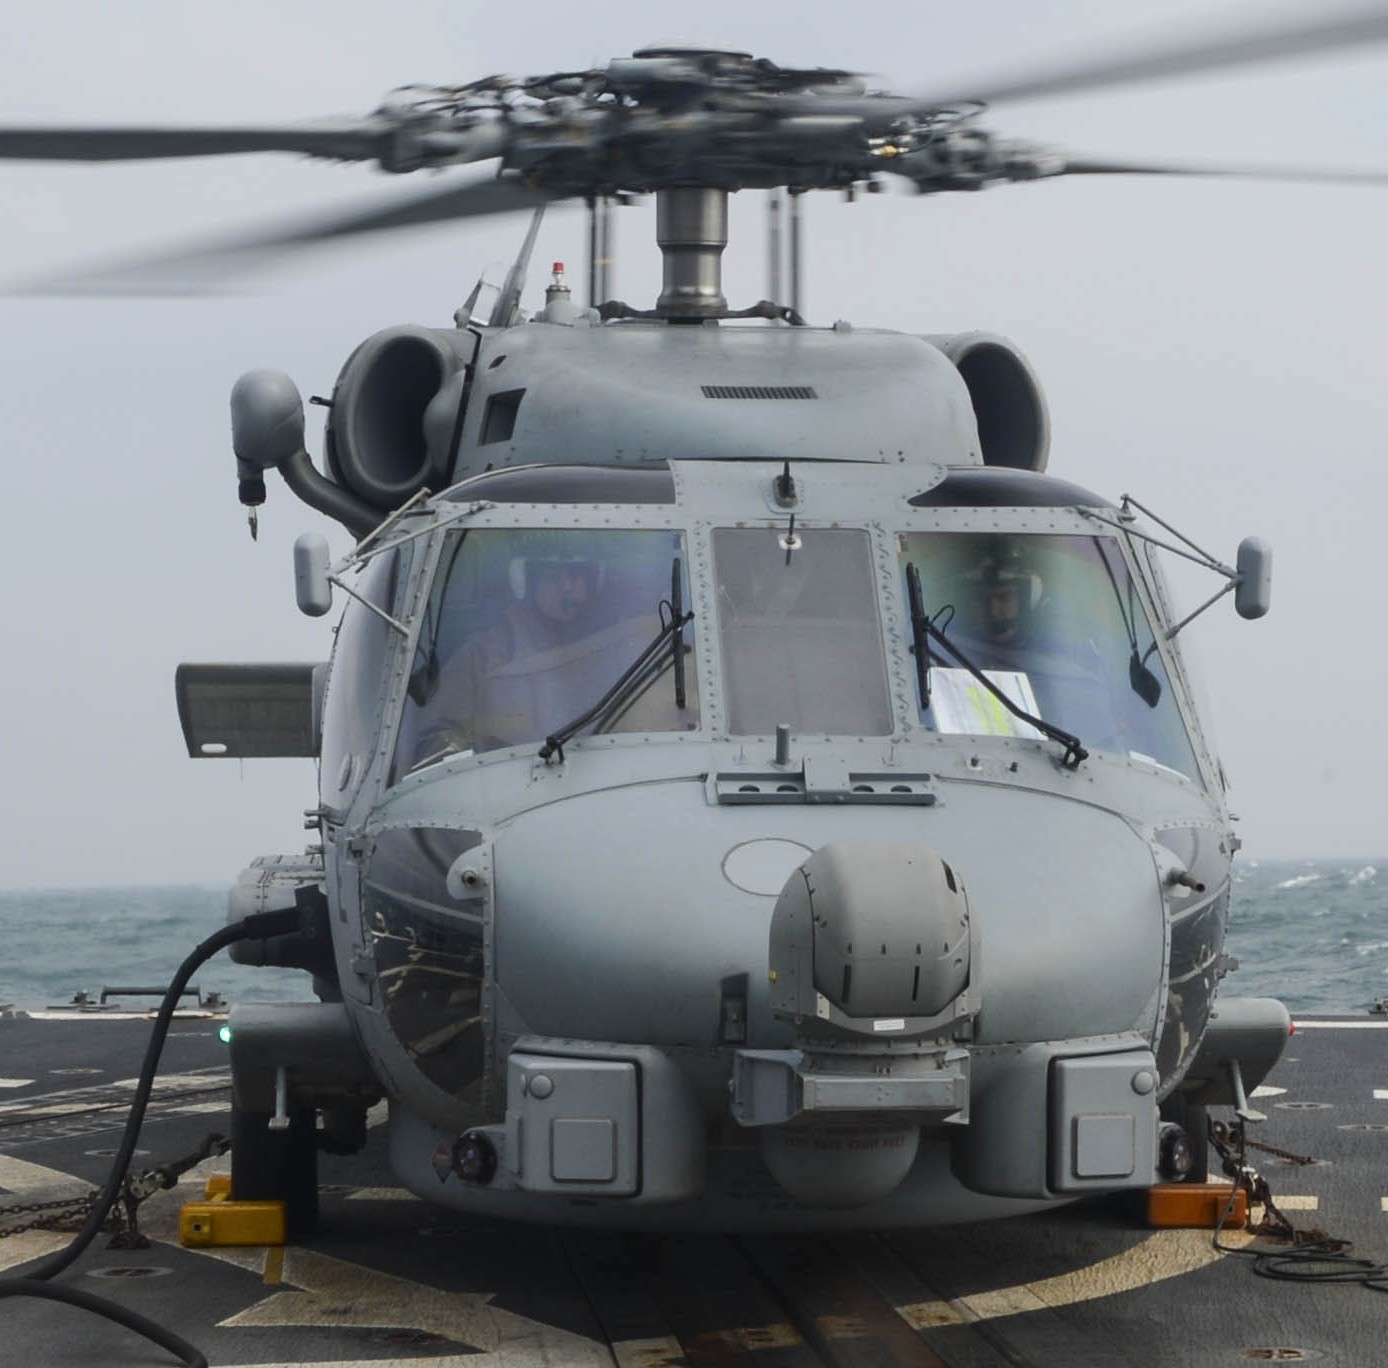 hsm-51 warlords helicopter maritime strike squadron mh-60r seahawk navy 2014 64